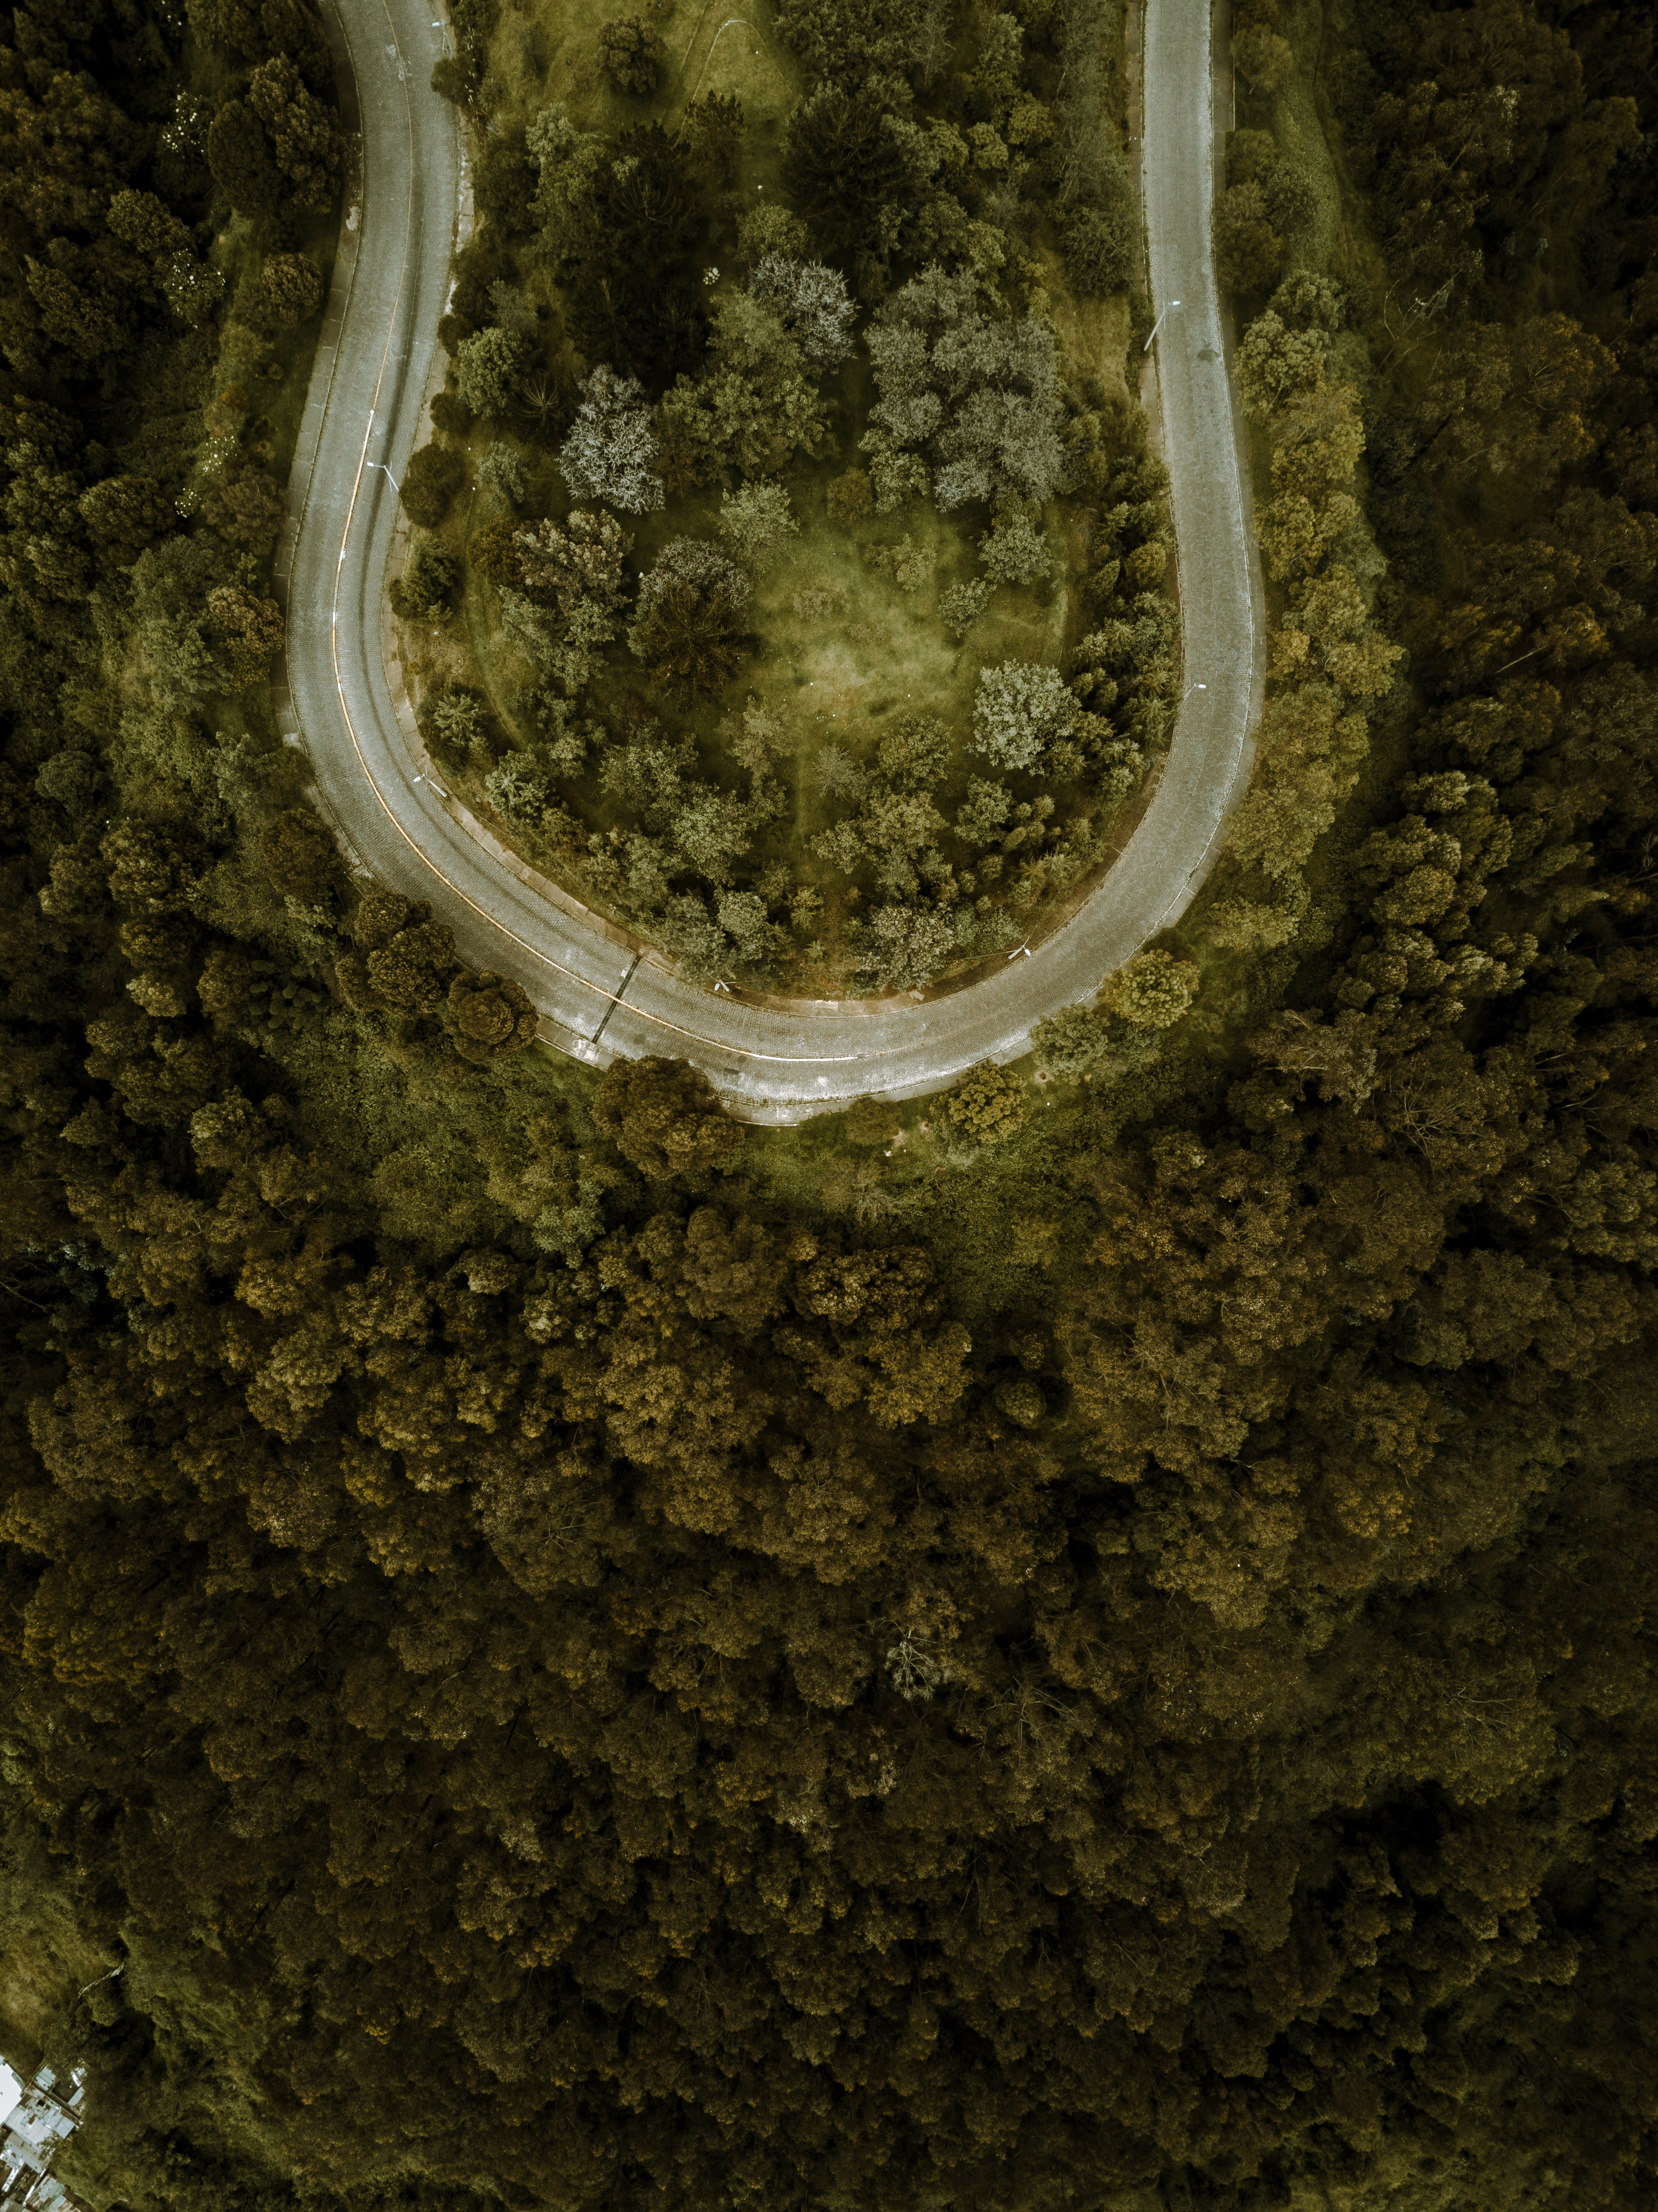 view from above, nature, road, turn, forest, winding, sinuous images